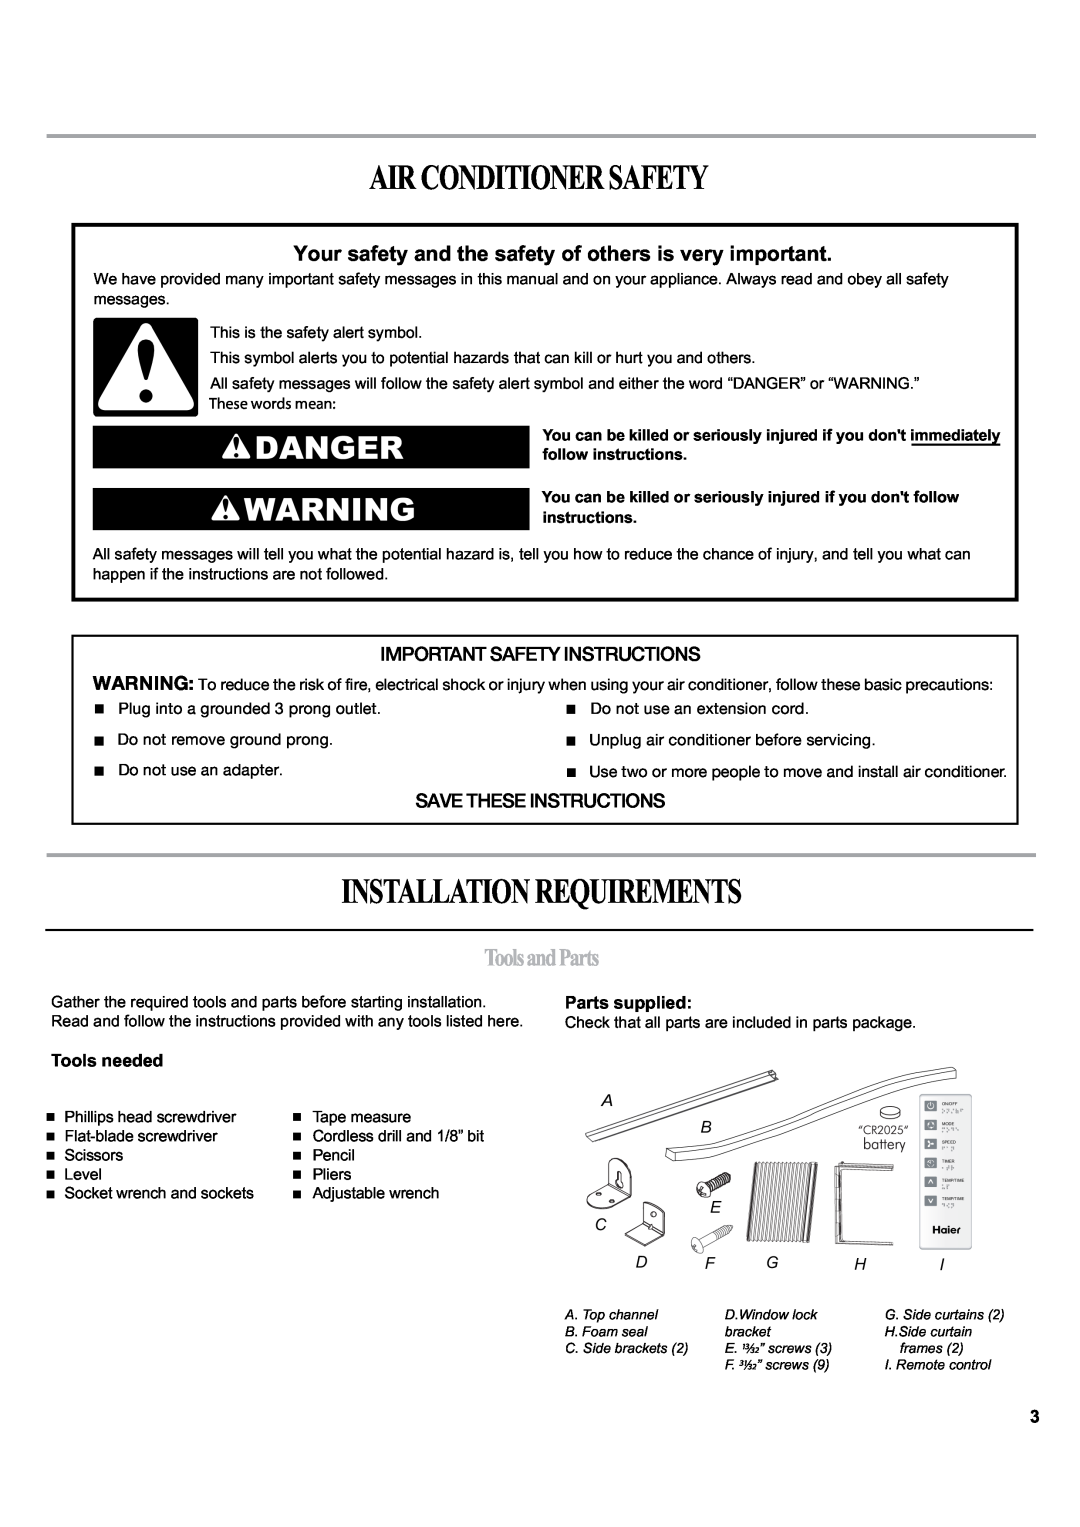 Haier ESA405K manual Airconditionersafety, Installationrequirements, Danger, ToolsandParts, Important Safety Instructions 